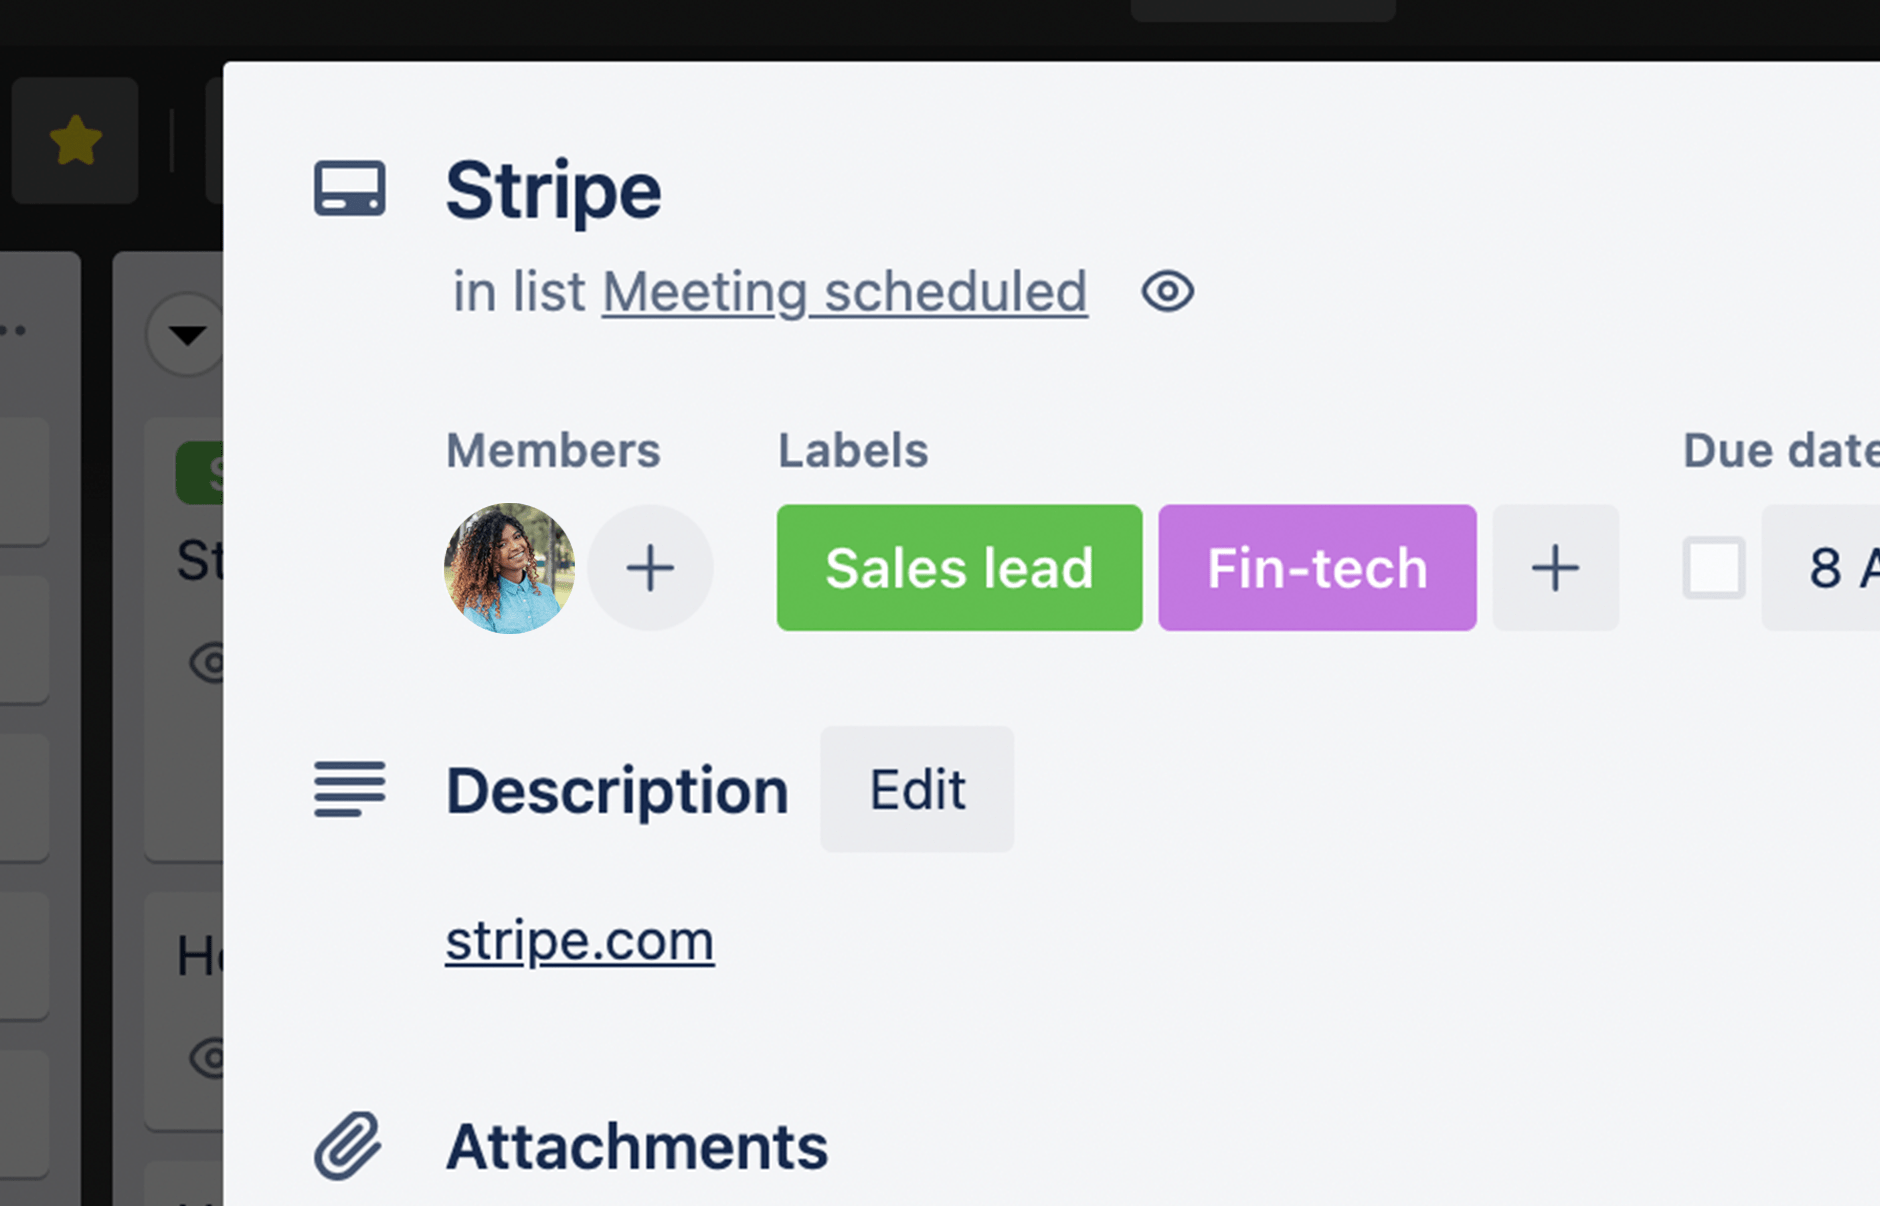 An example Trello card is pictured, with a company web address in the Description field. This is required to create a company record in Attio.